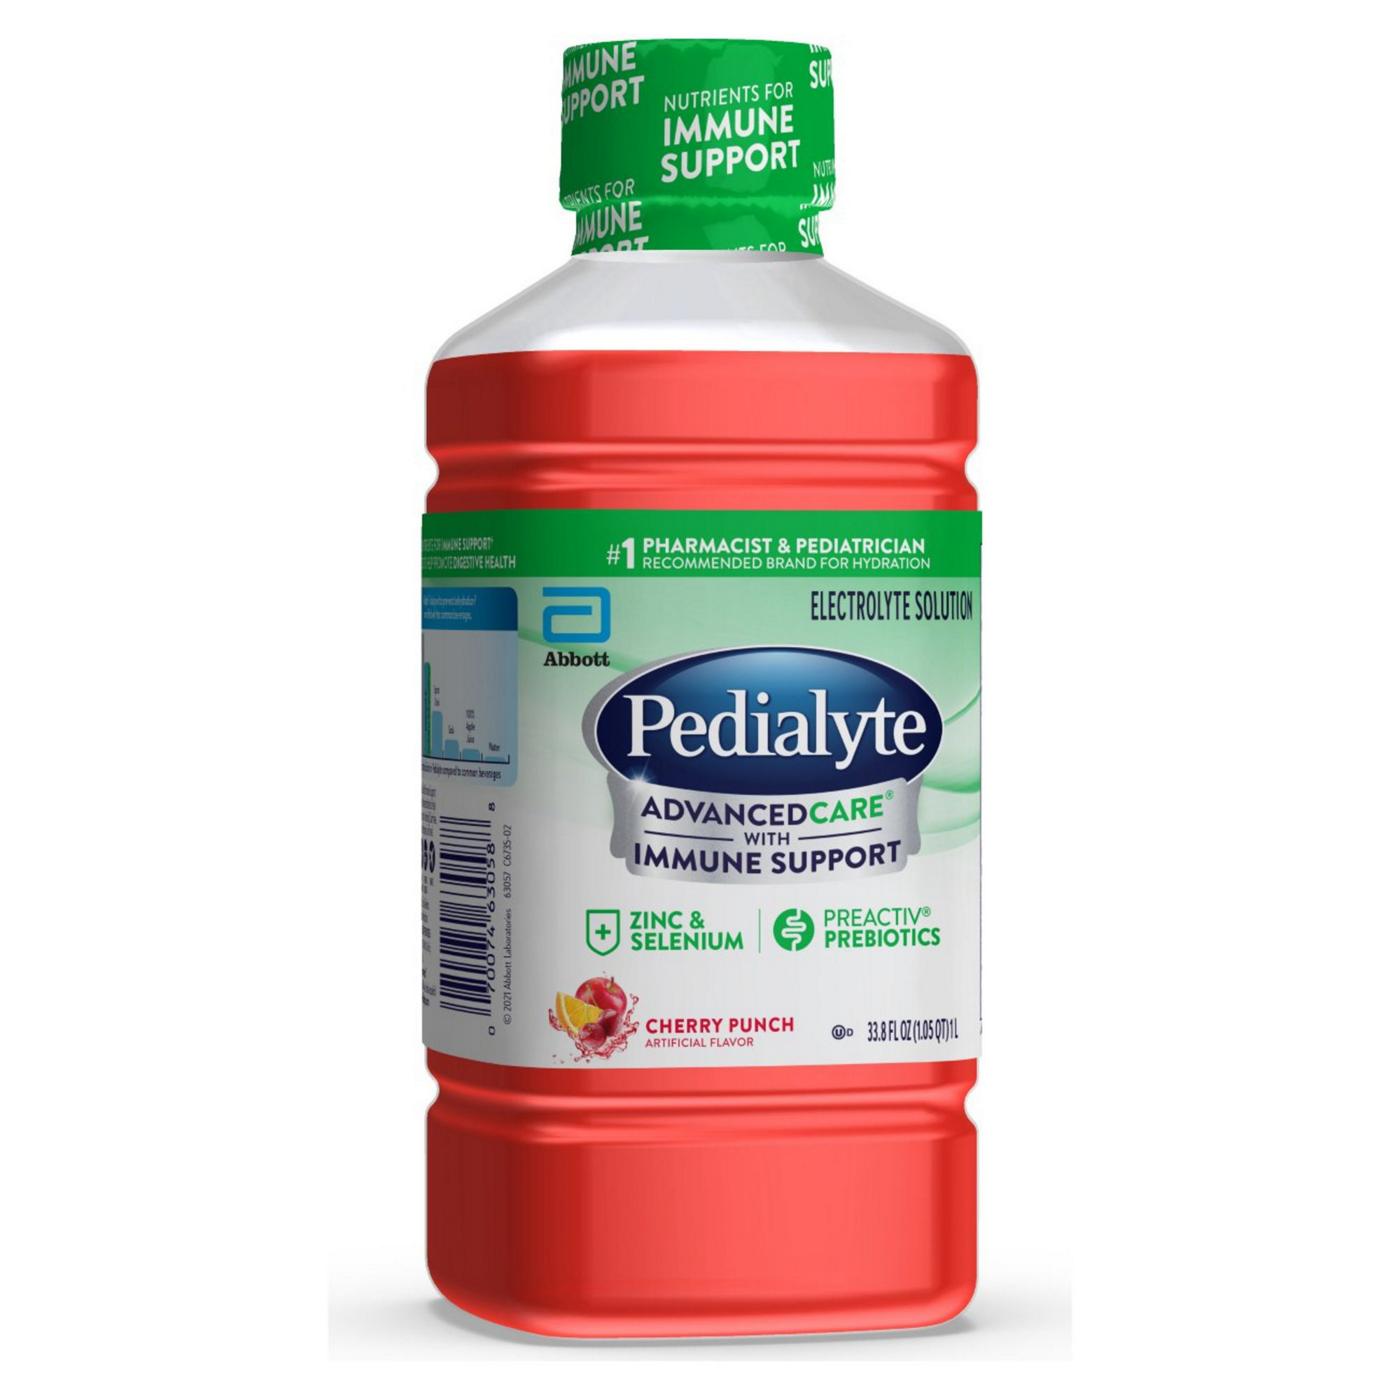 Pedialyte AdvancedCare Electrolyte Solution - Cherry Punch; image 4 of 4